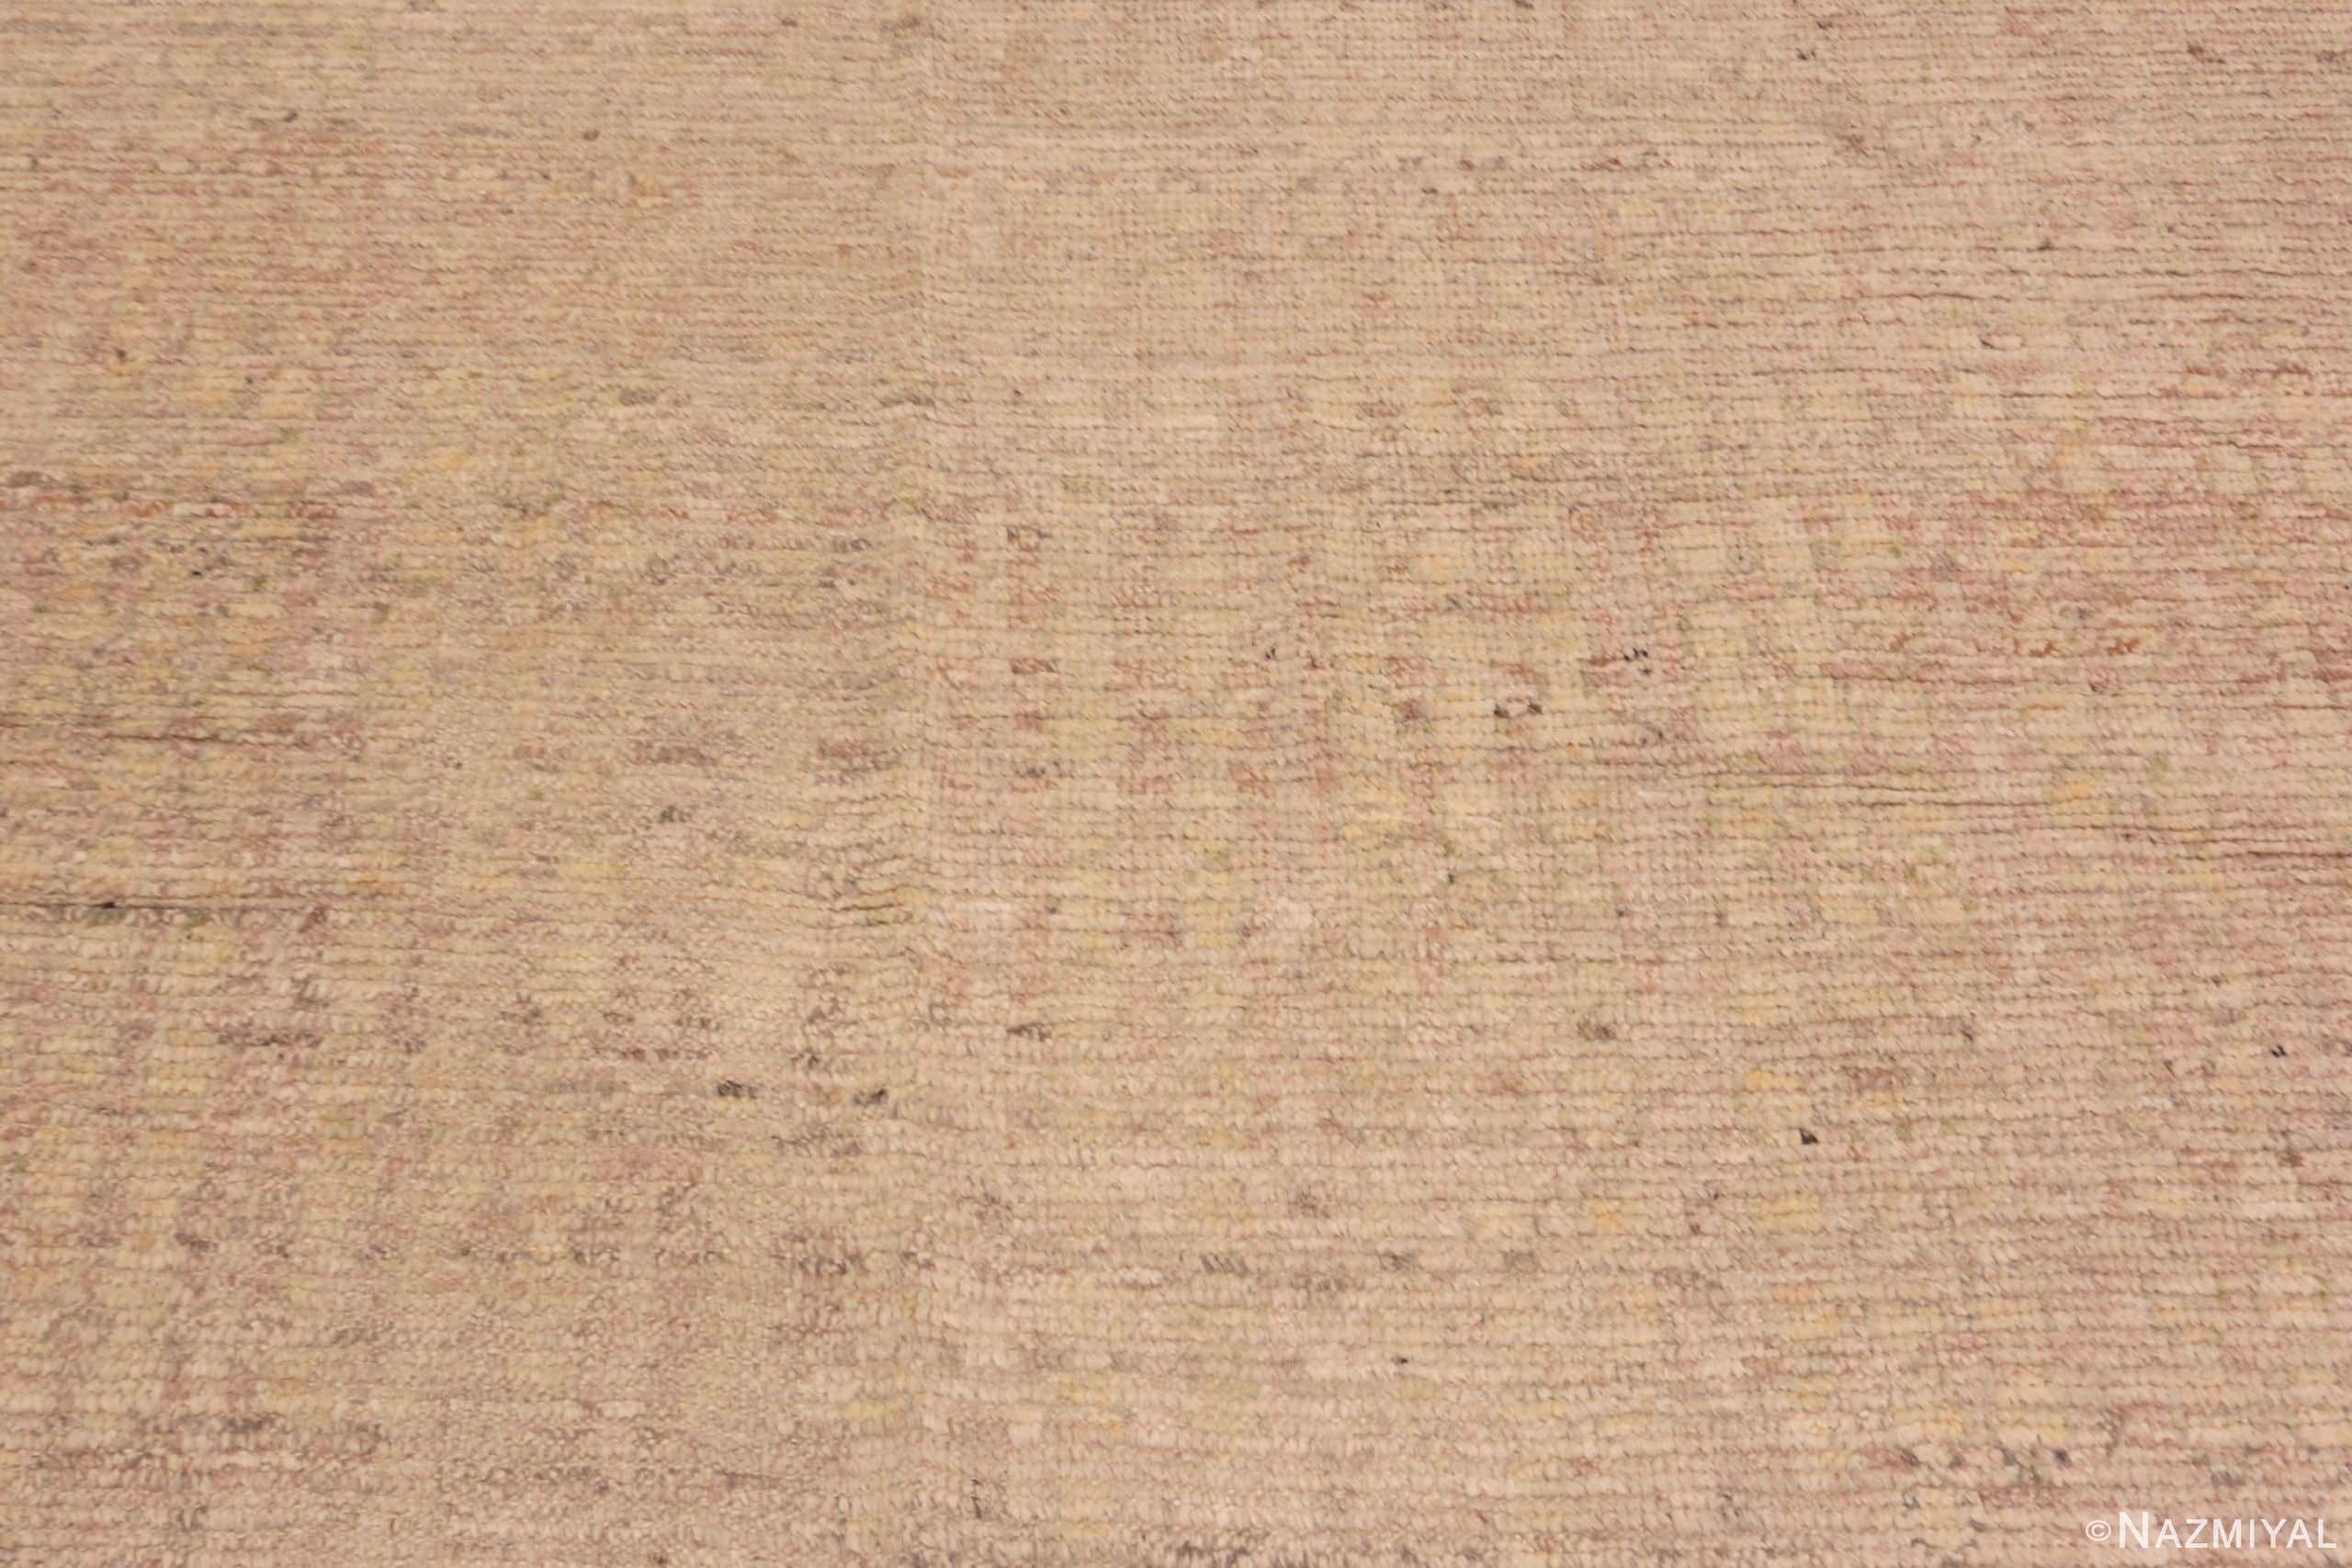 Texture Of Cream Color Oversized Modern Distressed Decorative Rug 60945 by Nazmiyal Antique Rugs